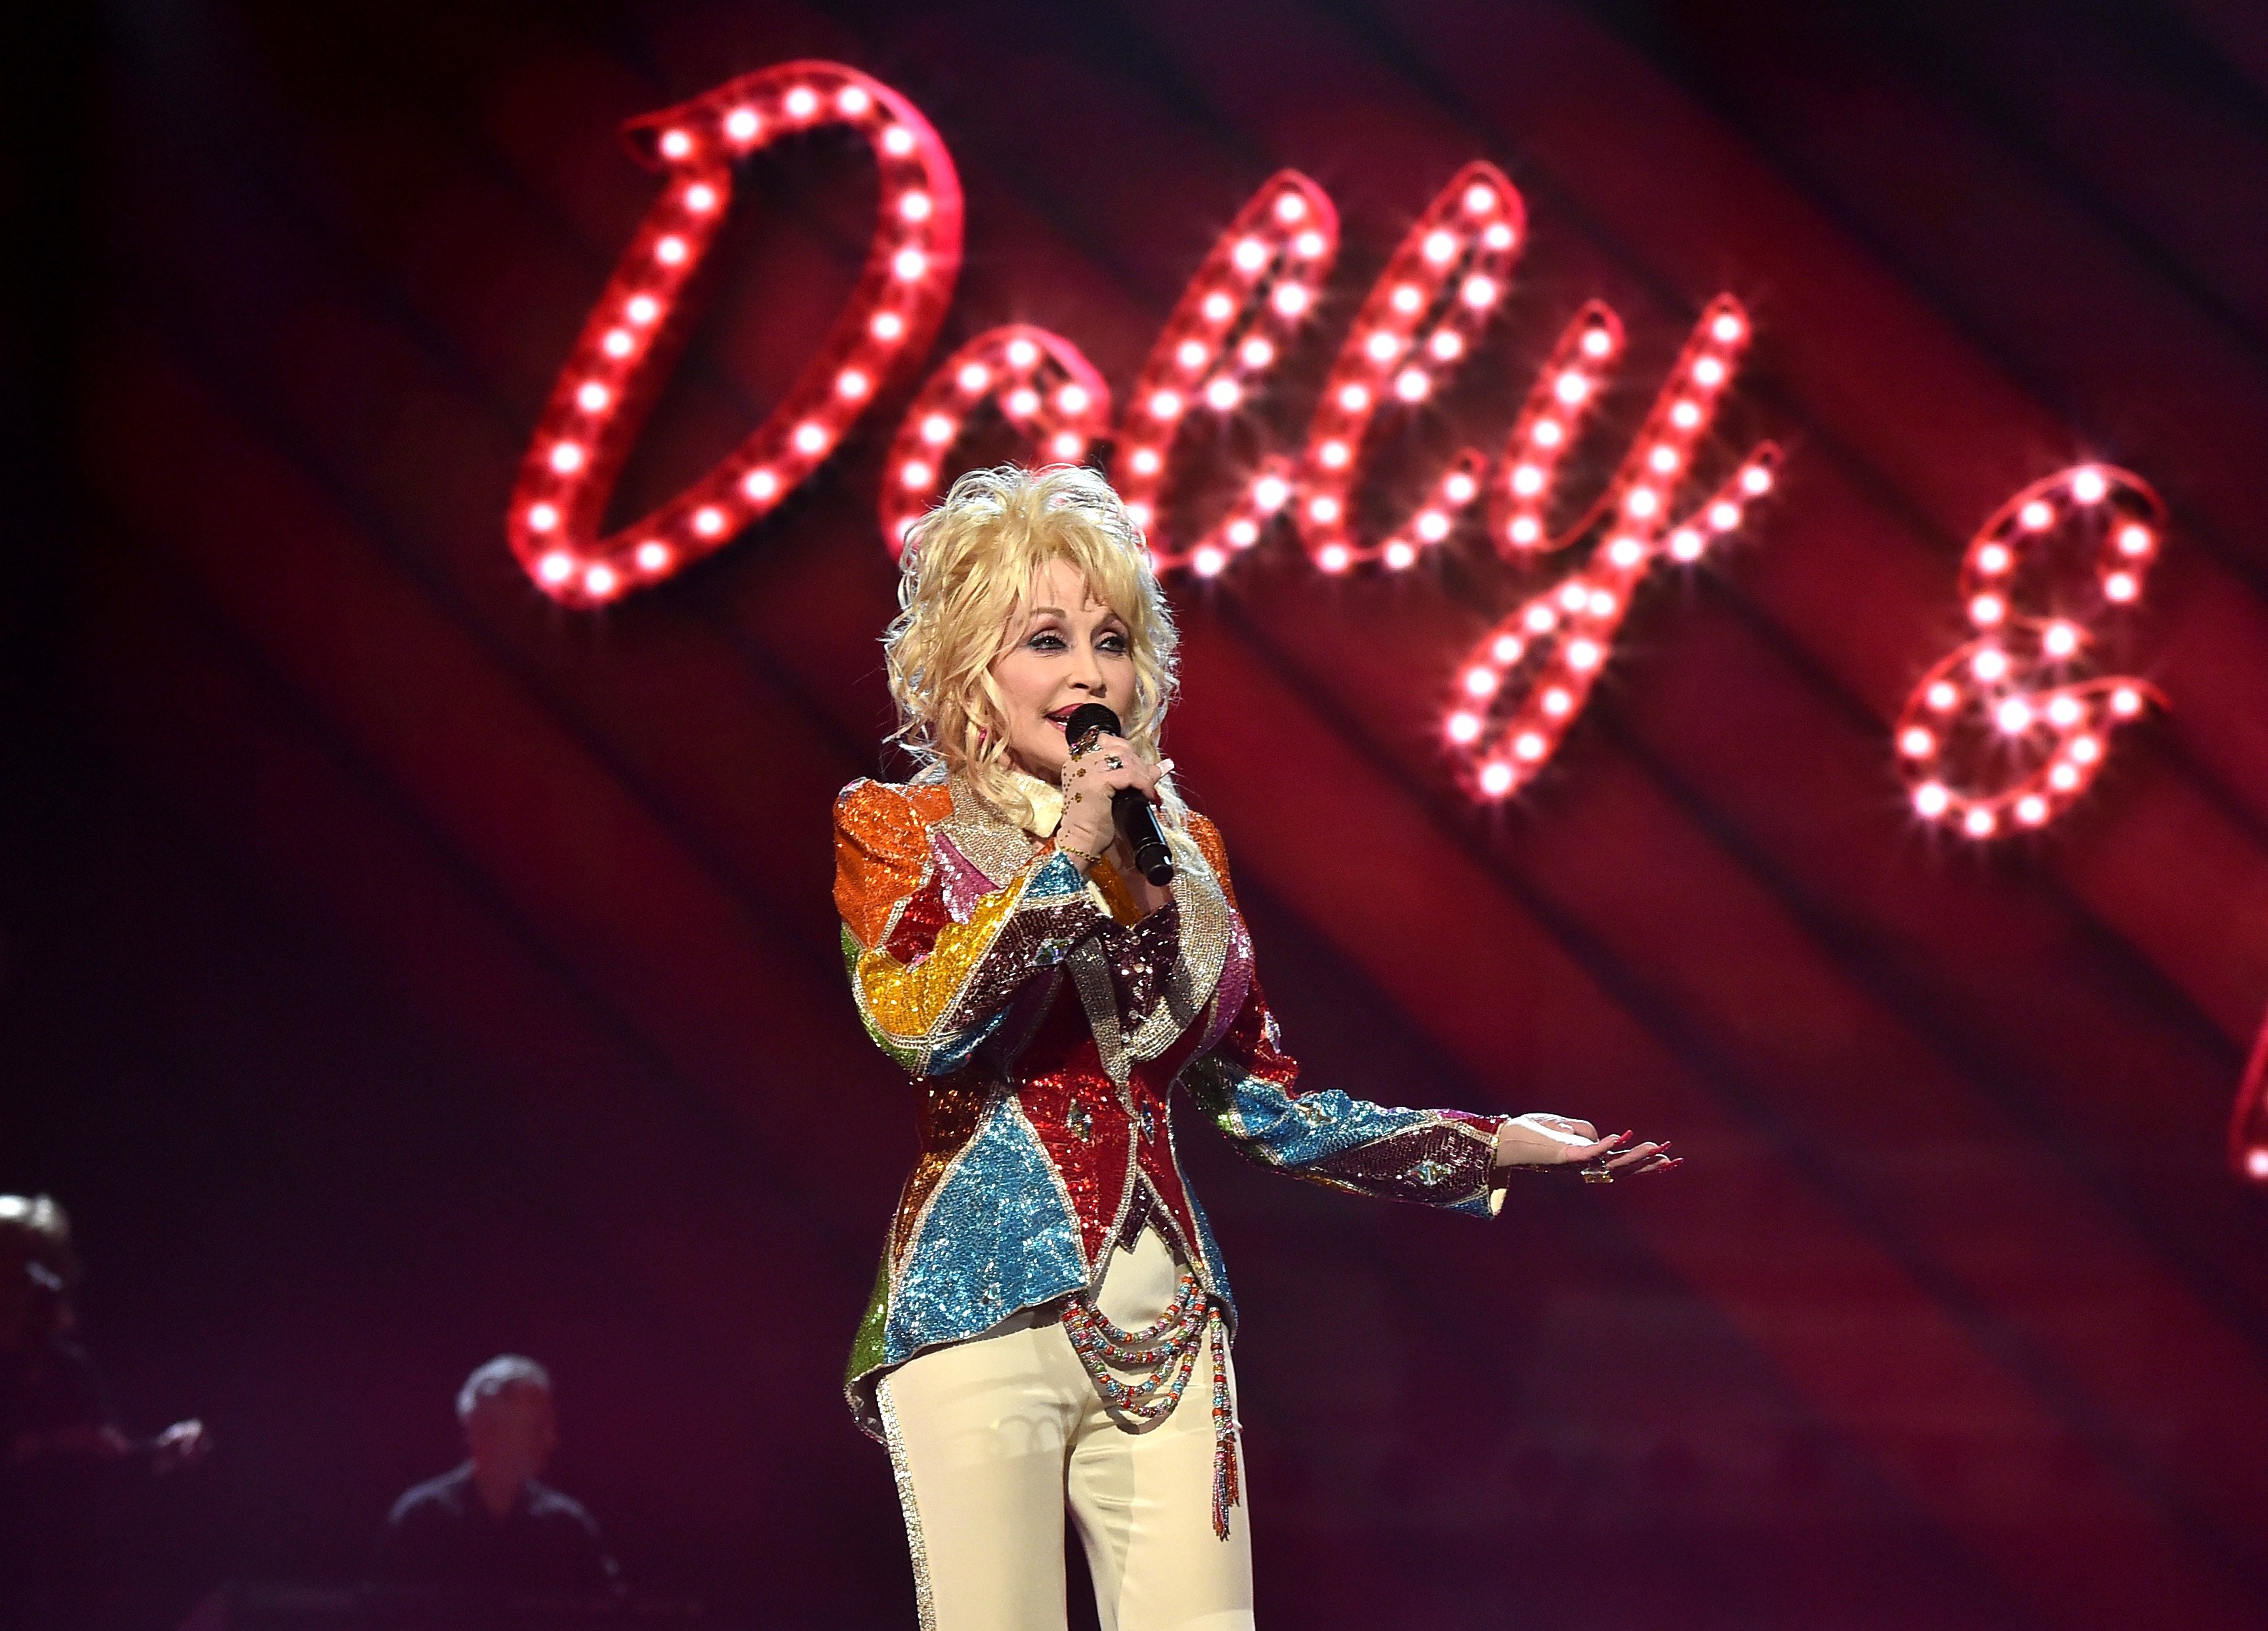 Dolly Parton in her colorful jacket